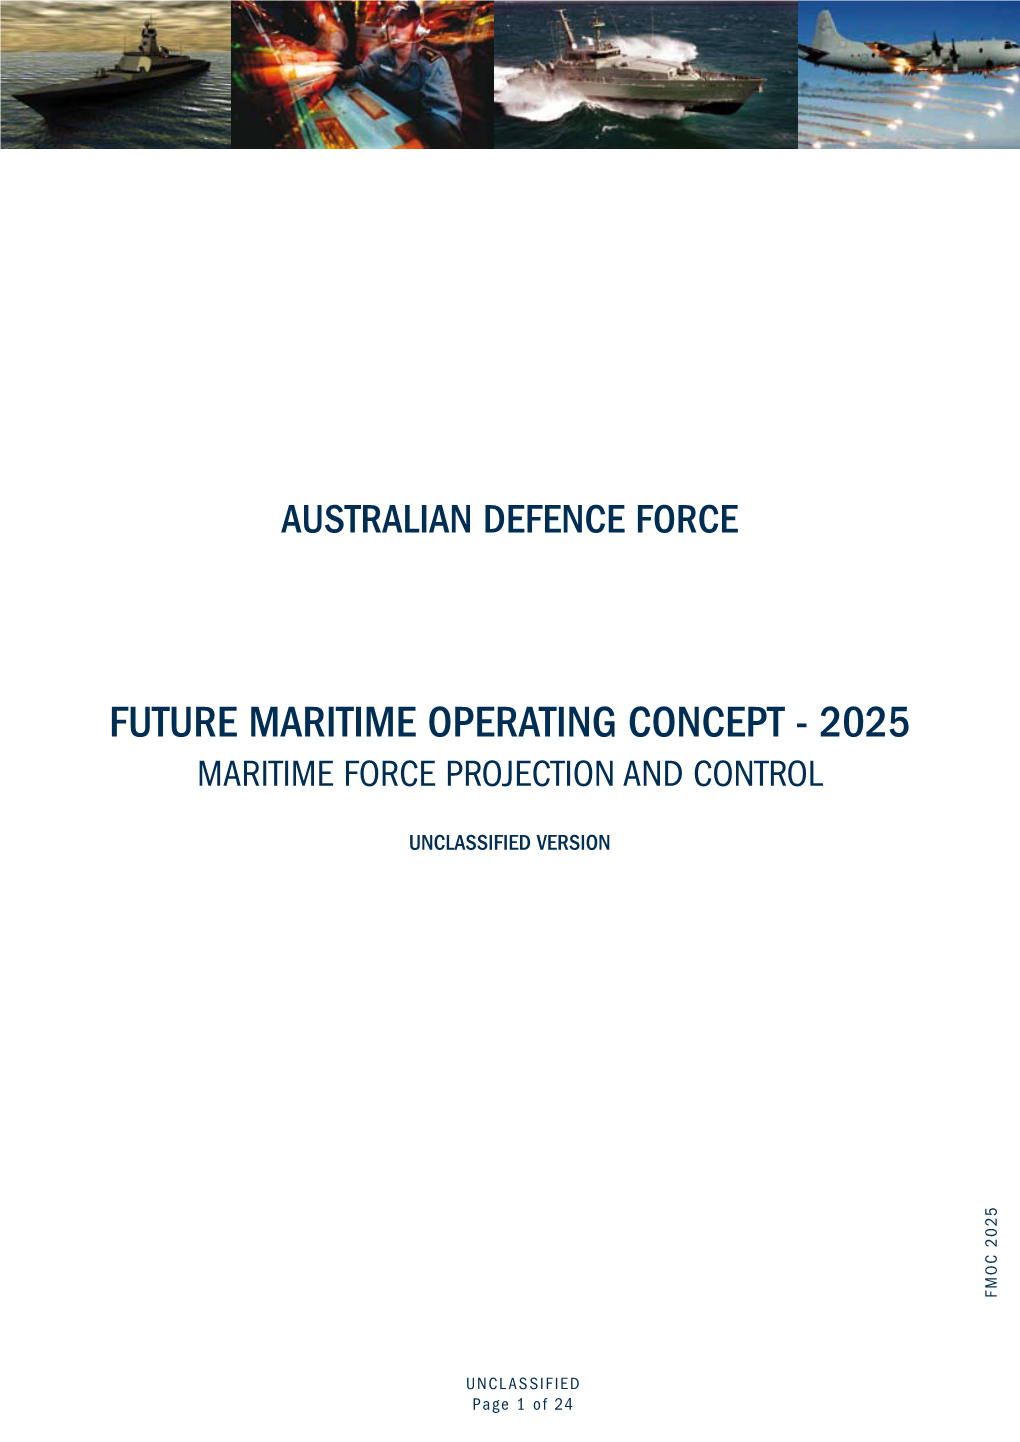 Future Maritime Operating Concept - 2025 Maritime Force Projection and Control